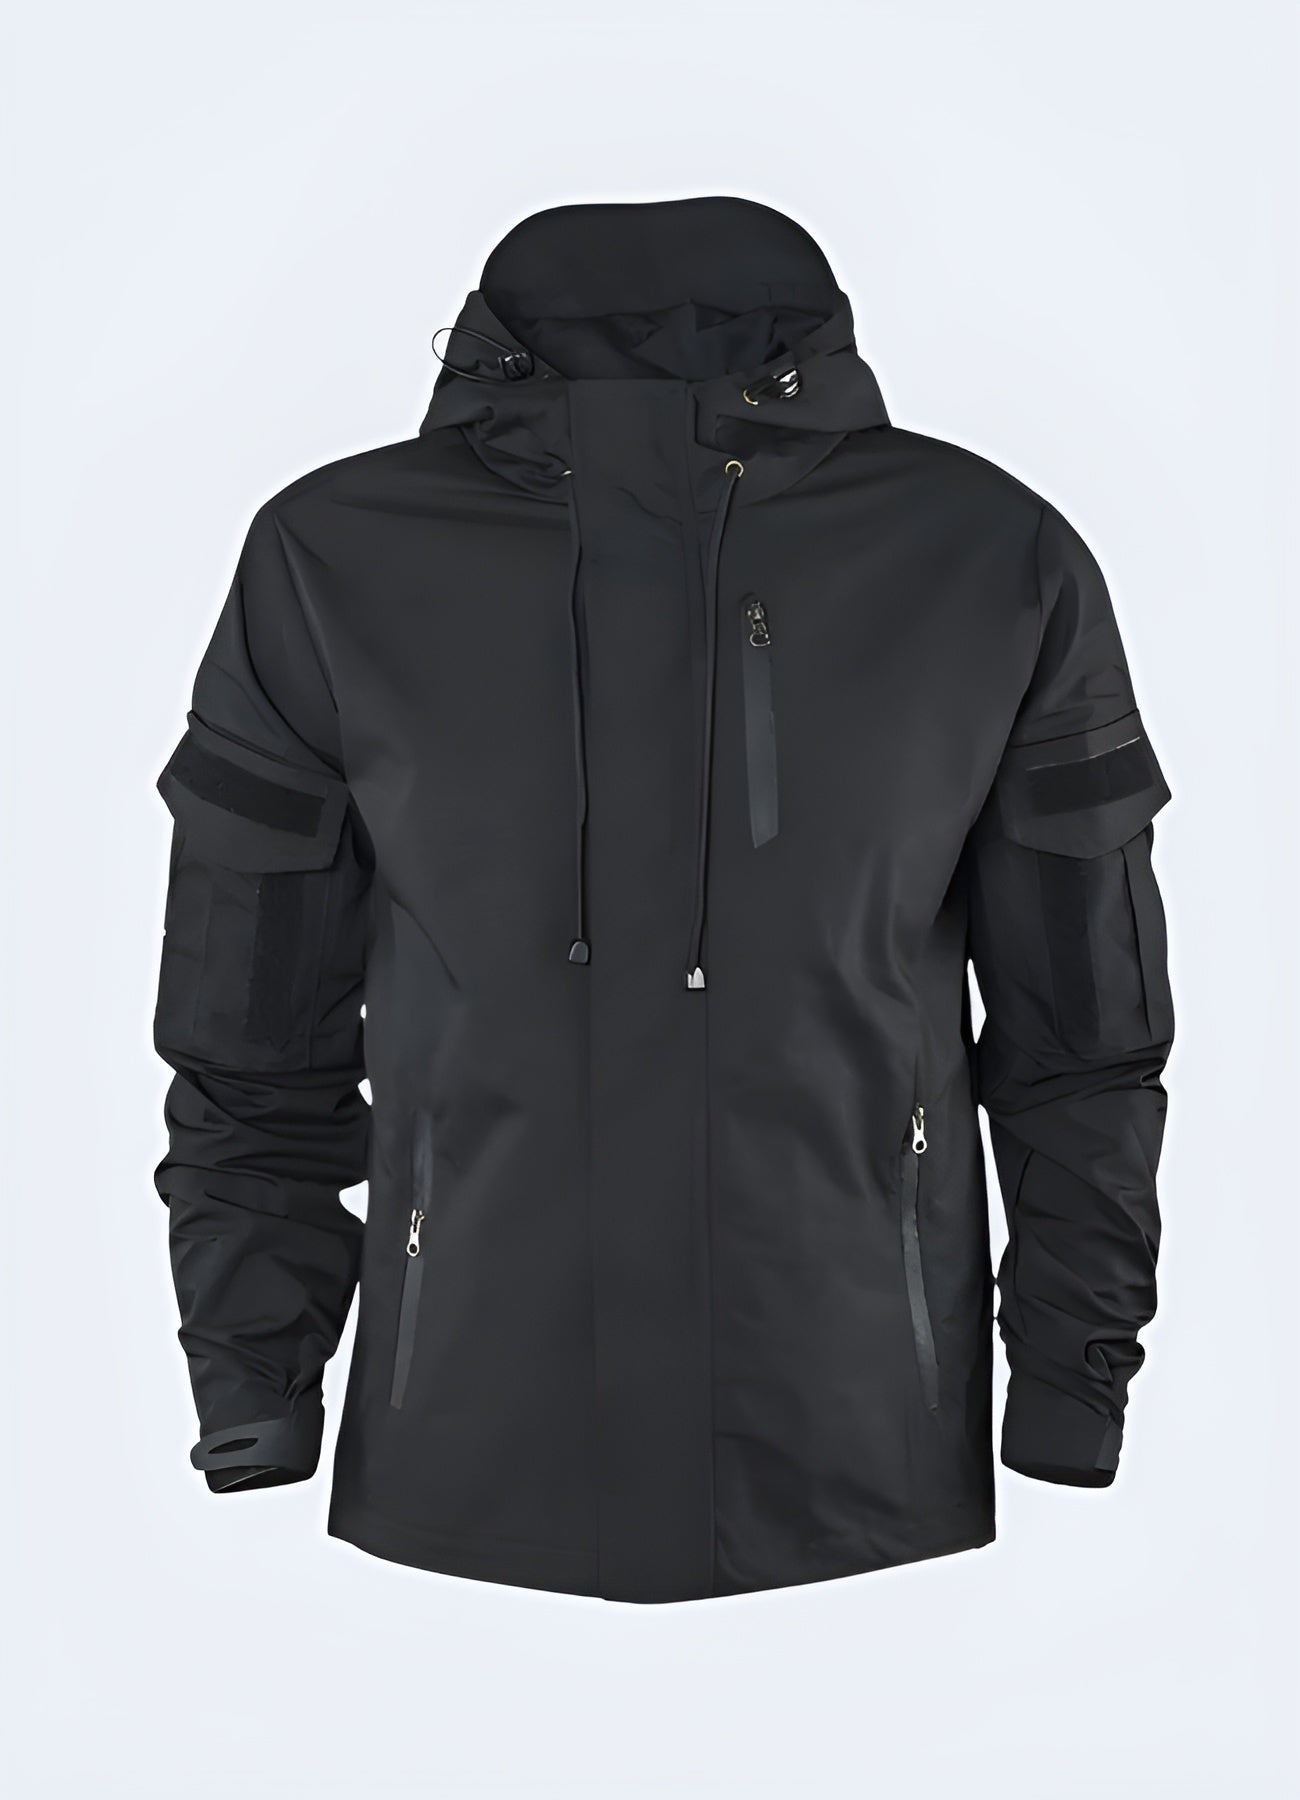 Exude urban style and tactical functionality with this sleek black tactical jacket.